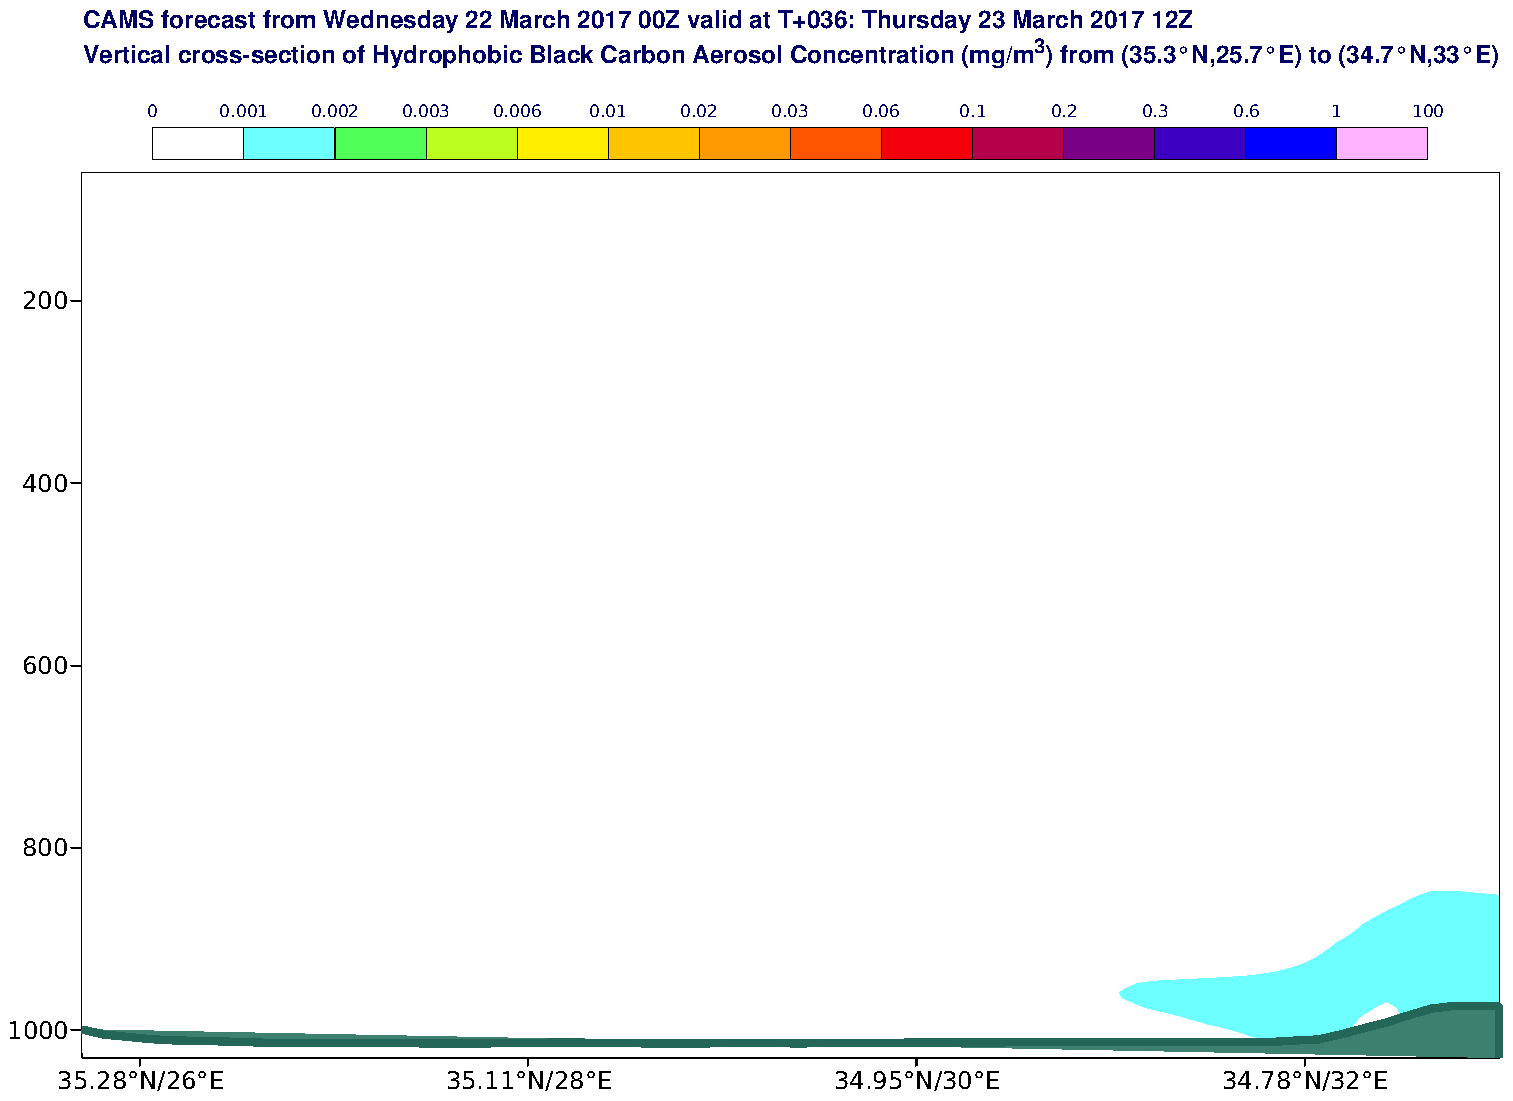 Vertical cross-section of Hydrophobic Black Carbon Aerosol Concentration (mg/m3) valid at T36 - 2017-03-23 12:00